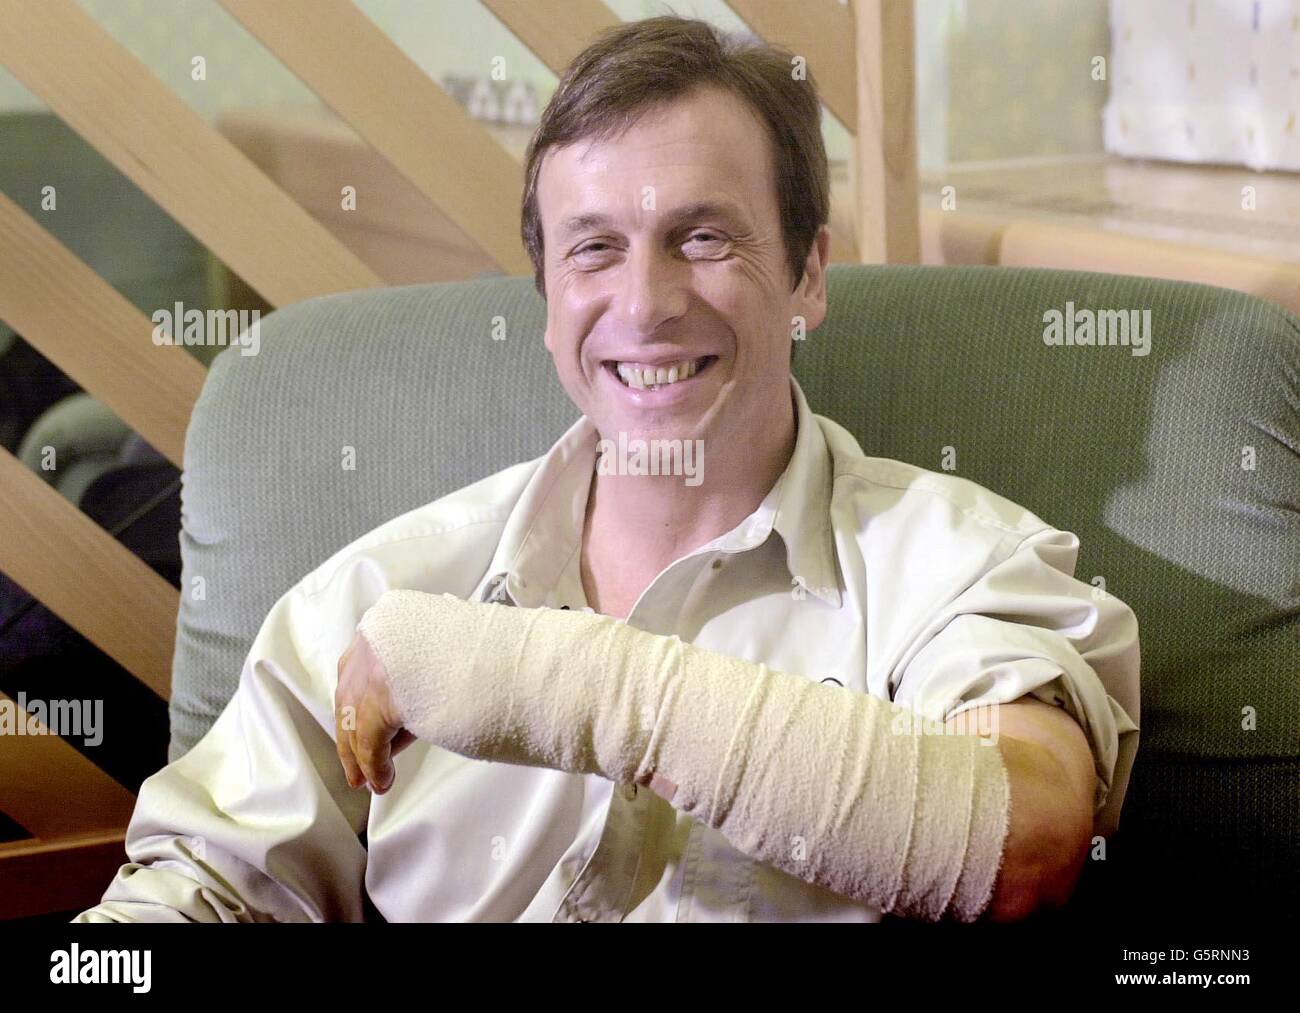 Professor Kevin Warwick at Oxford's Radcliffe Infirmary (Hospital) after his operation to place a mirochip in his arm. Surgeons have carried out a ground-breaking operation on a cybernetics professor so that his nervous system can be wired up to a computer. * Professor Kevin Warwick, the world's first cyborg part human, part machine hopes that readings can now be taken from the implant in his arm of electrical impulses coursing through his nerves. These signals, encoding movements like wiggling fingers and feelings like shock and pain, will be transmitted to a computer and recorded for the Stock Photo